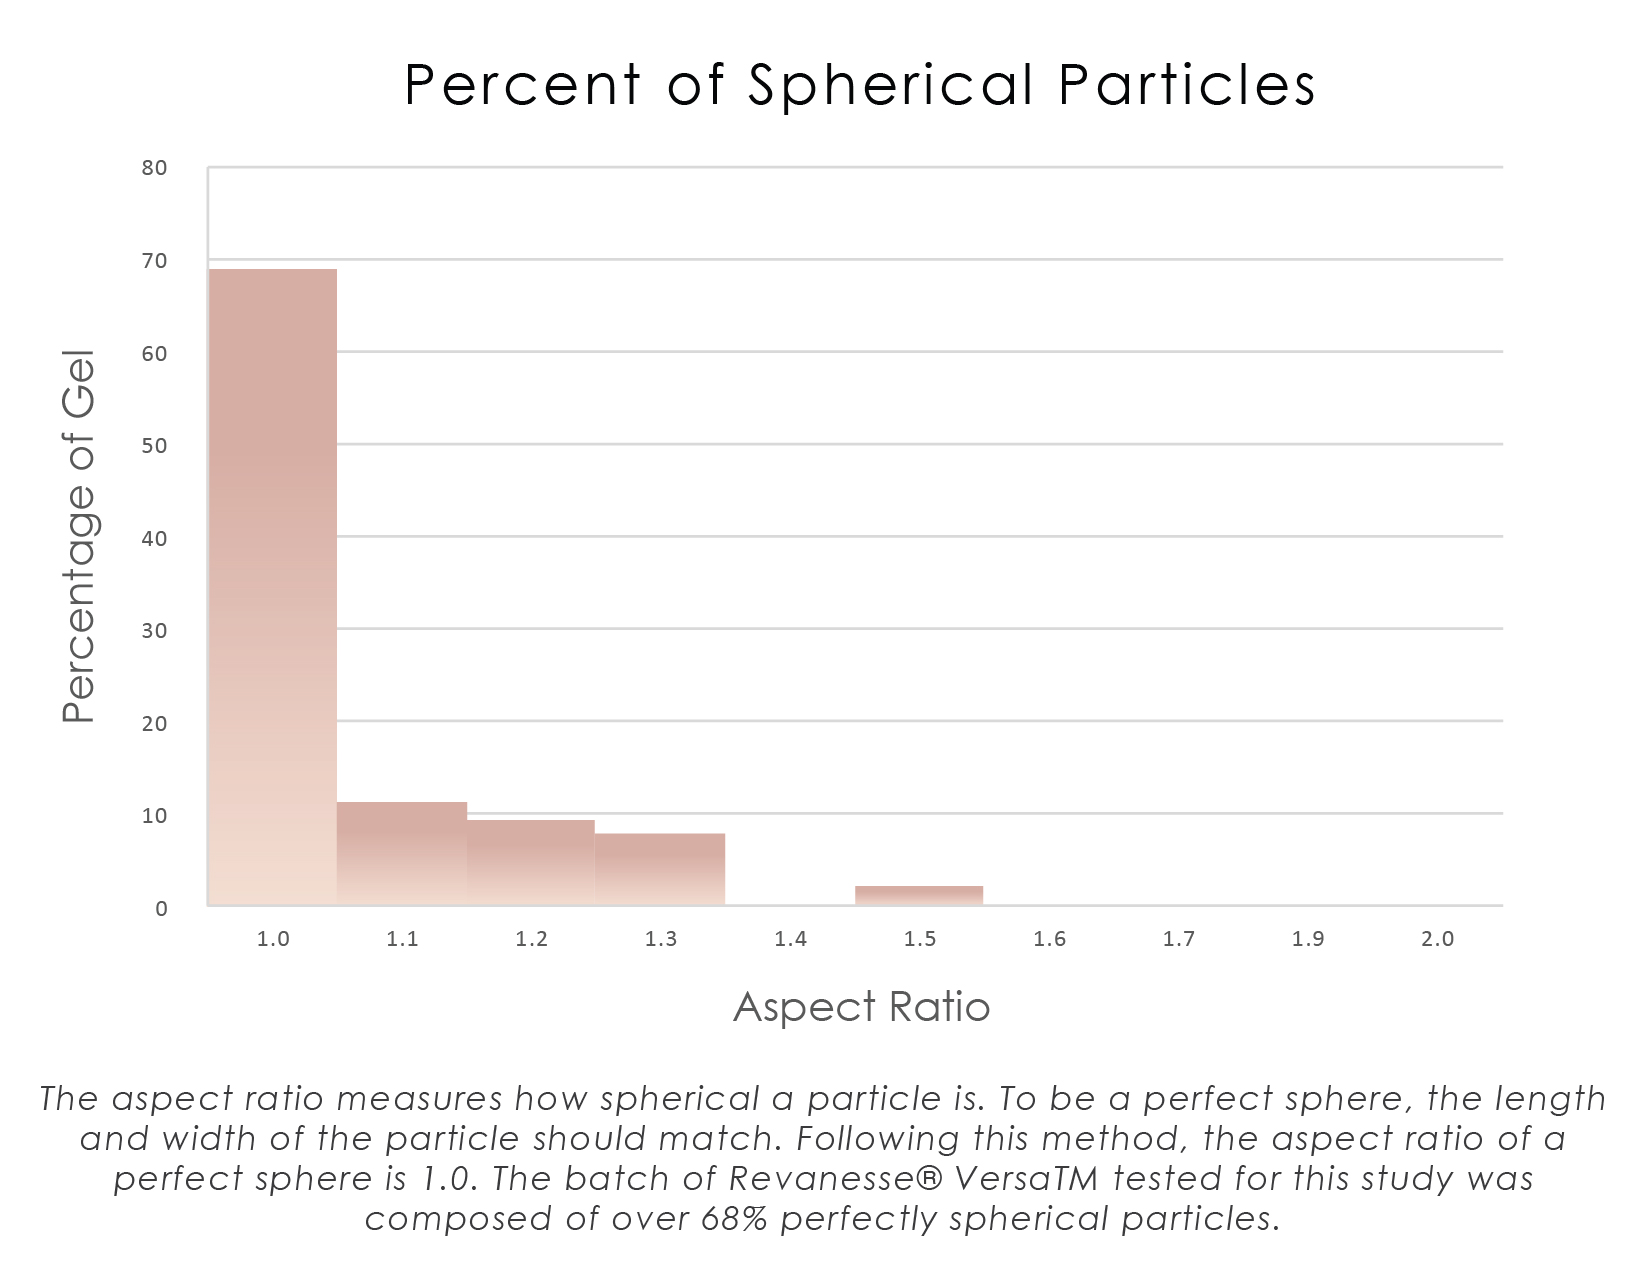 chart showing that nearly 70% of Versa particles are perfectly spherical.